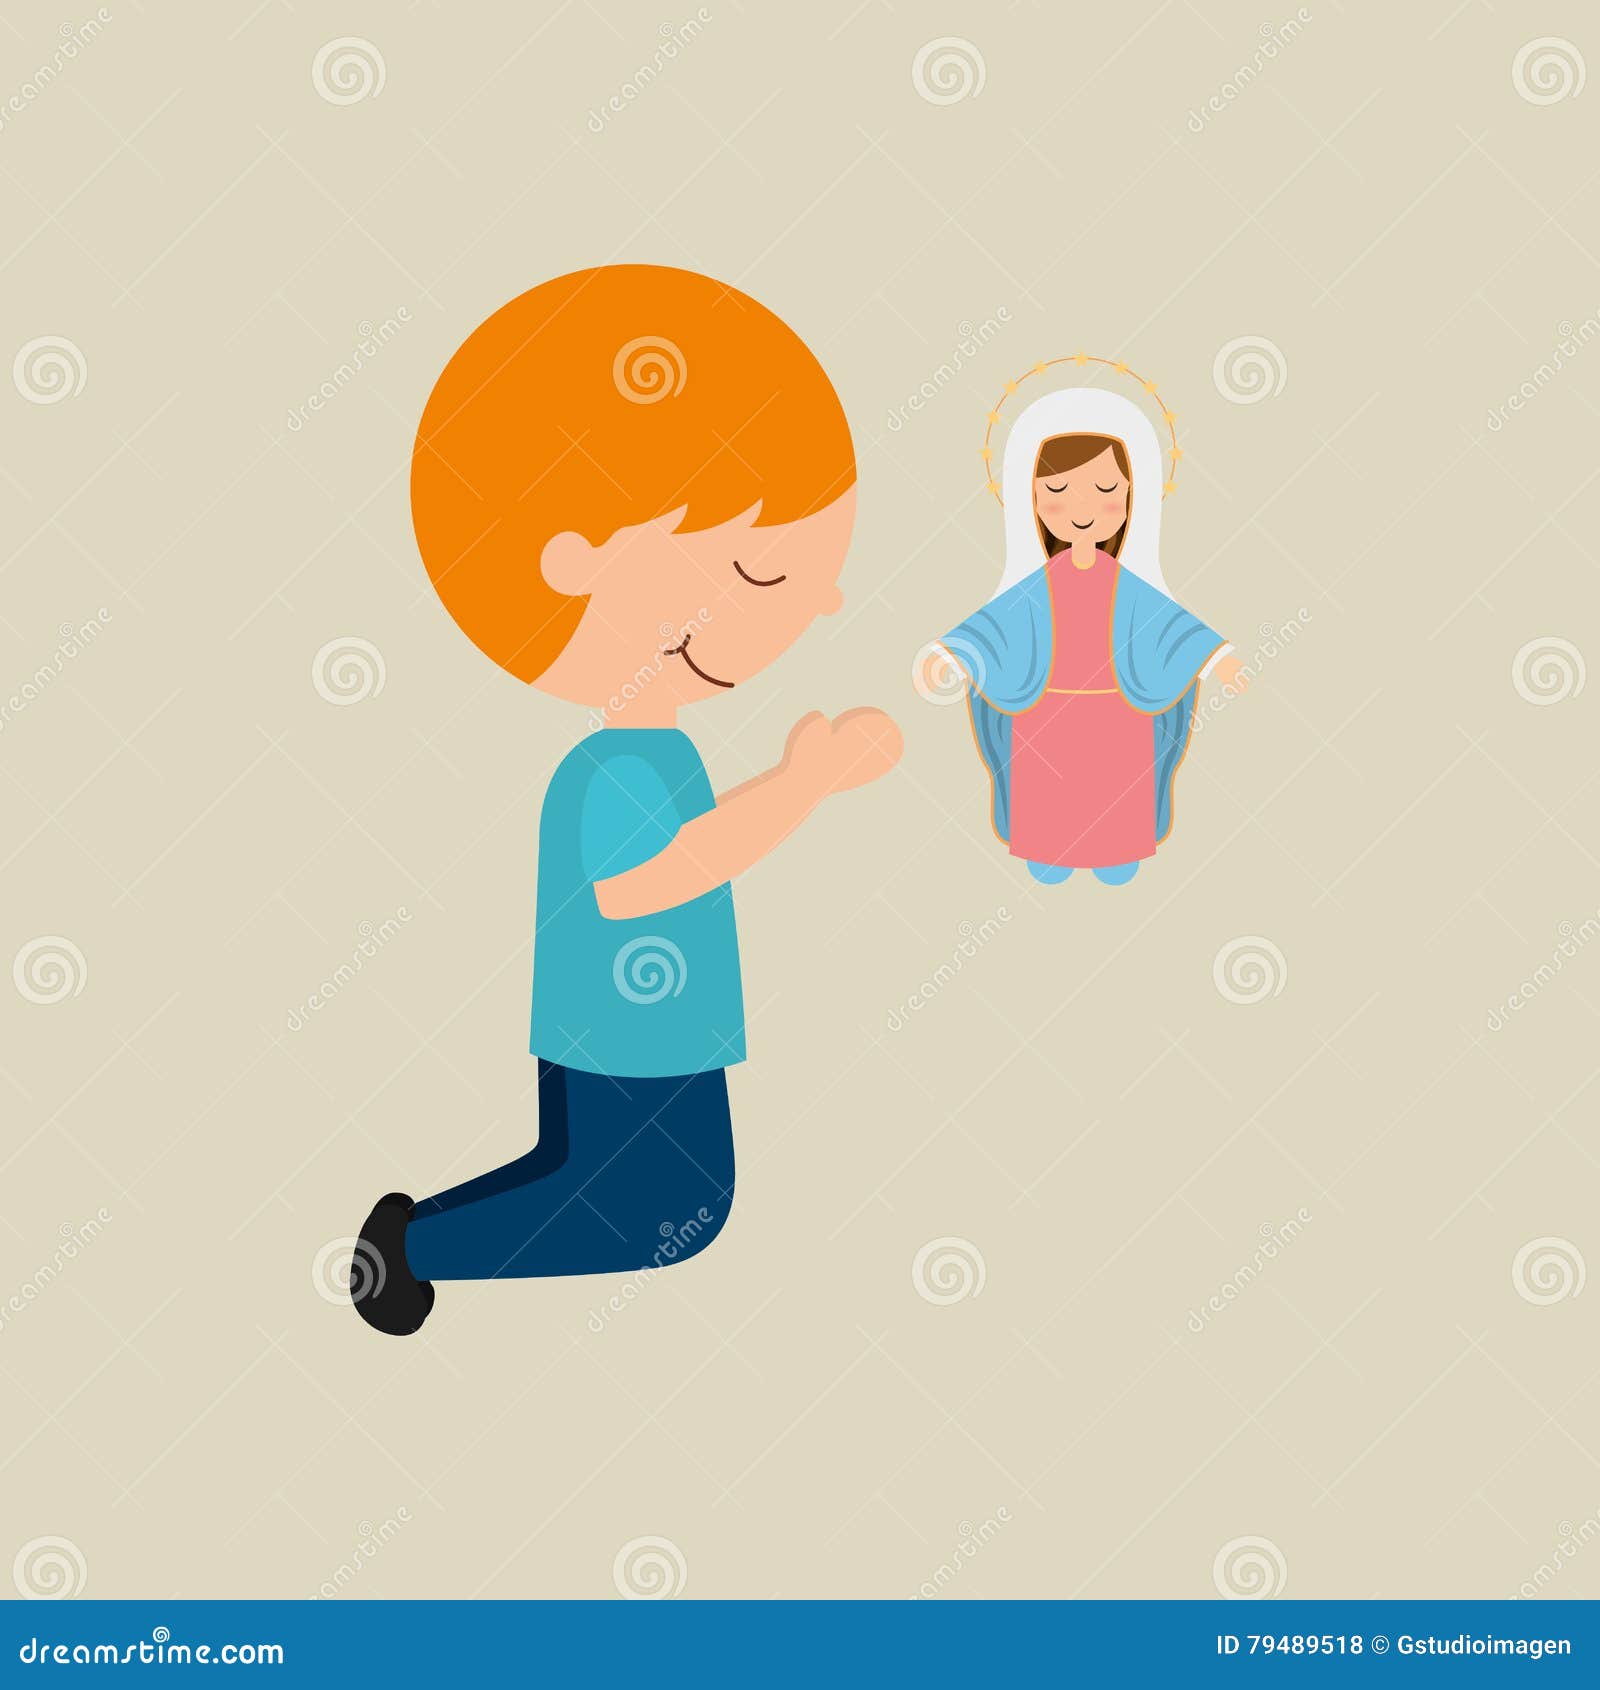 Cute Boy Blessed on Bible Desing Icon Stock Illustration - Illustration ...